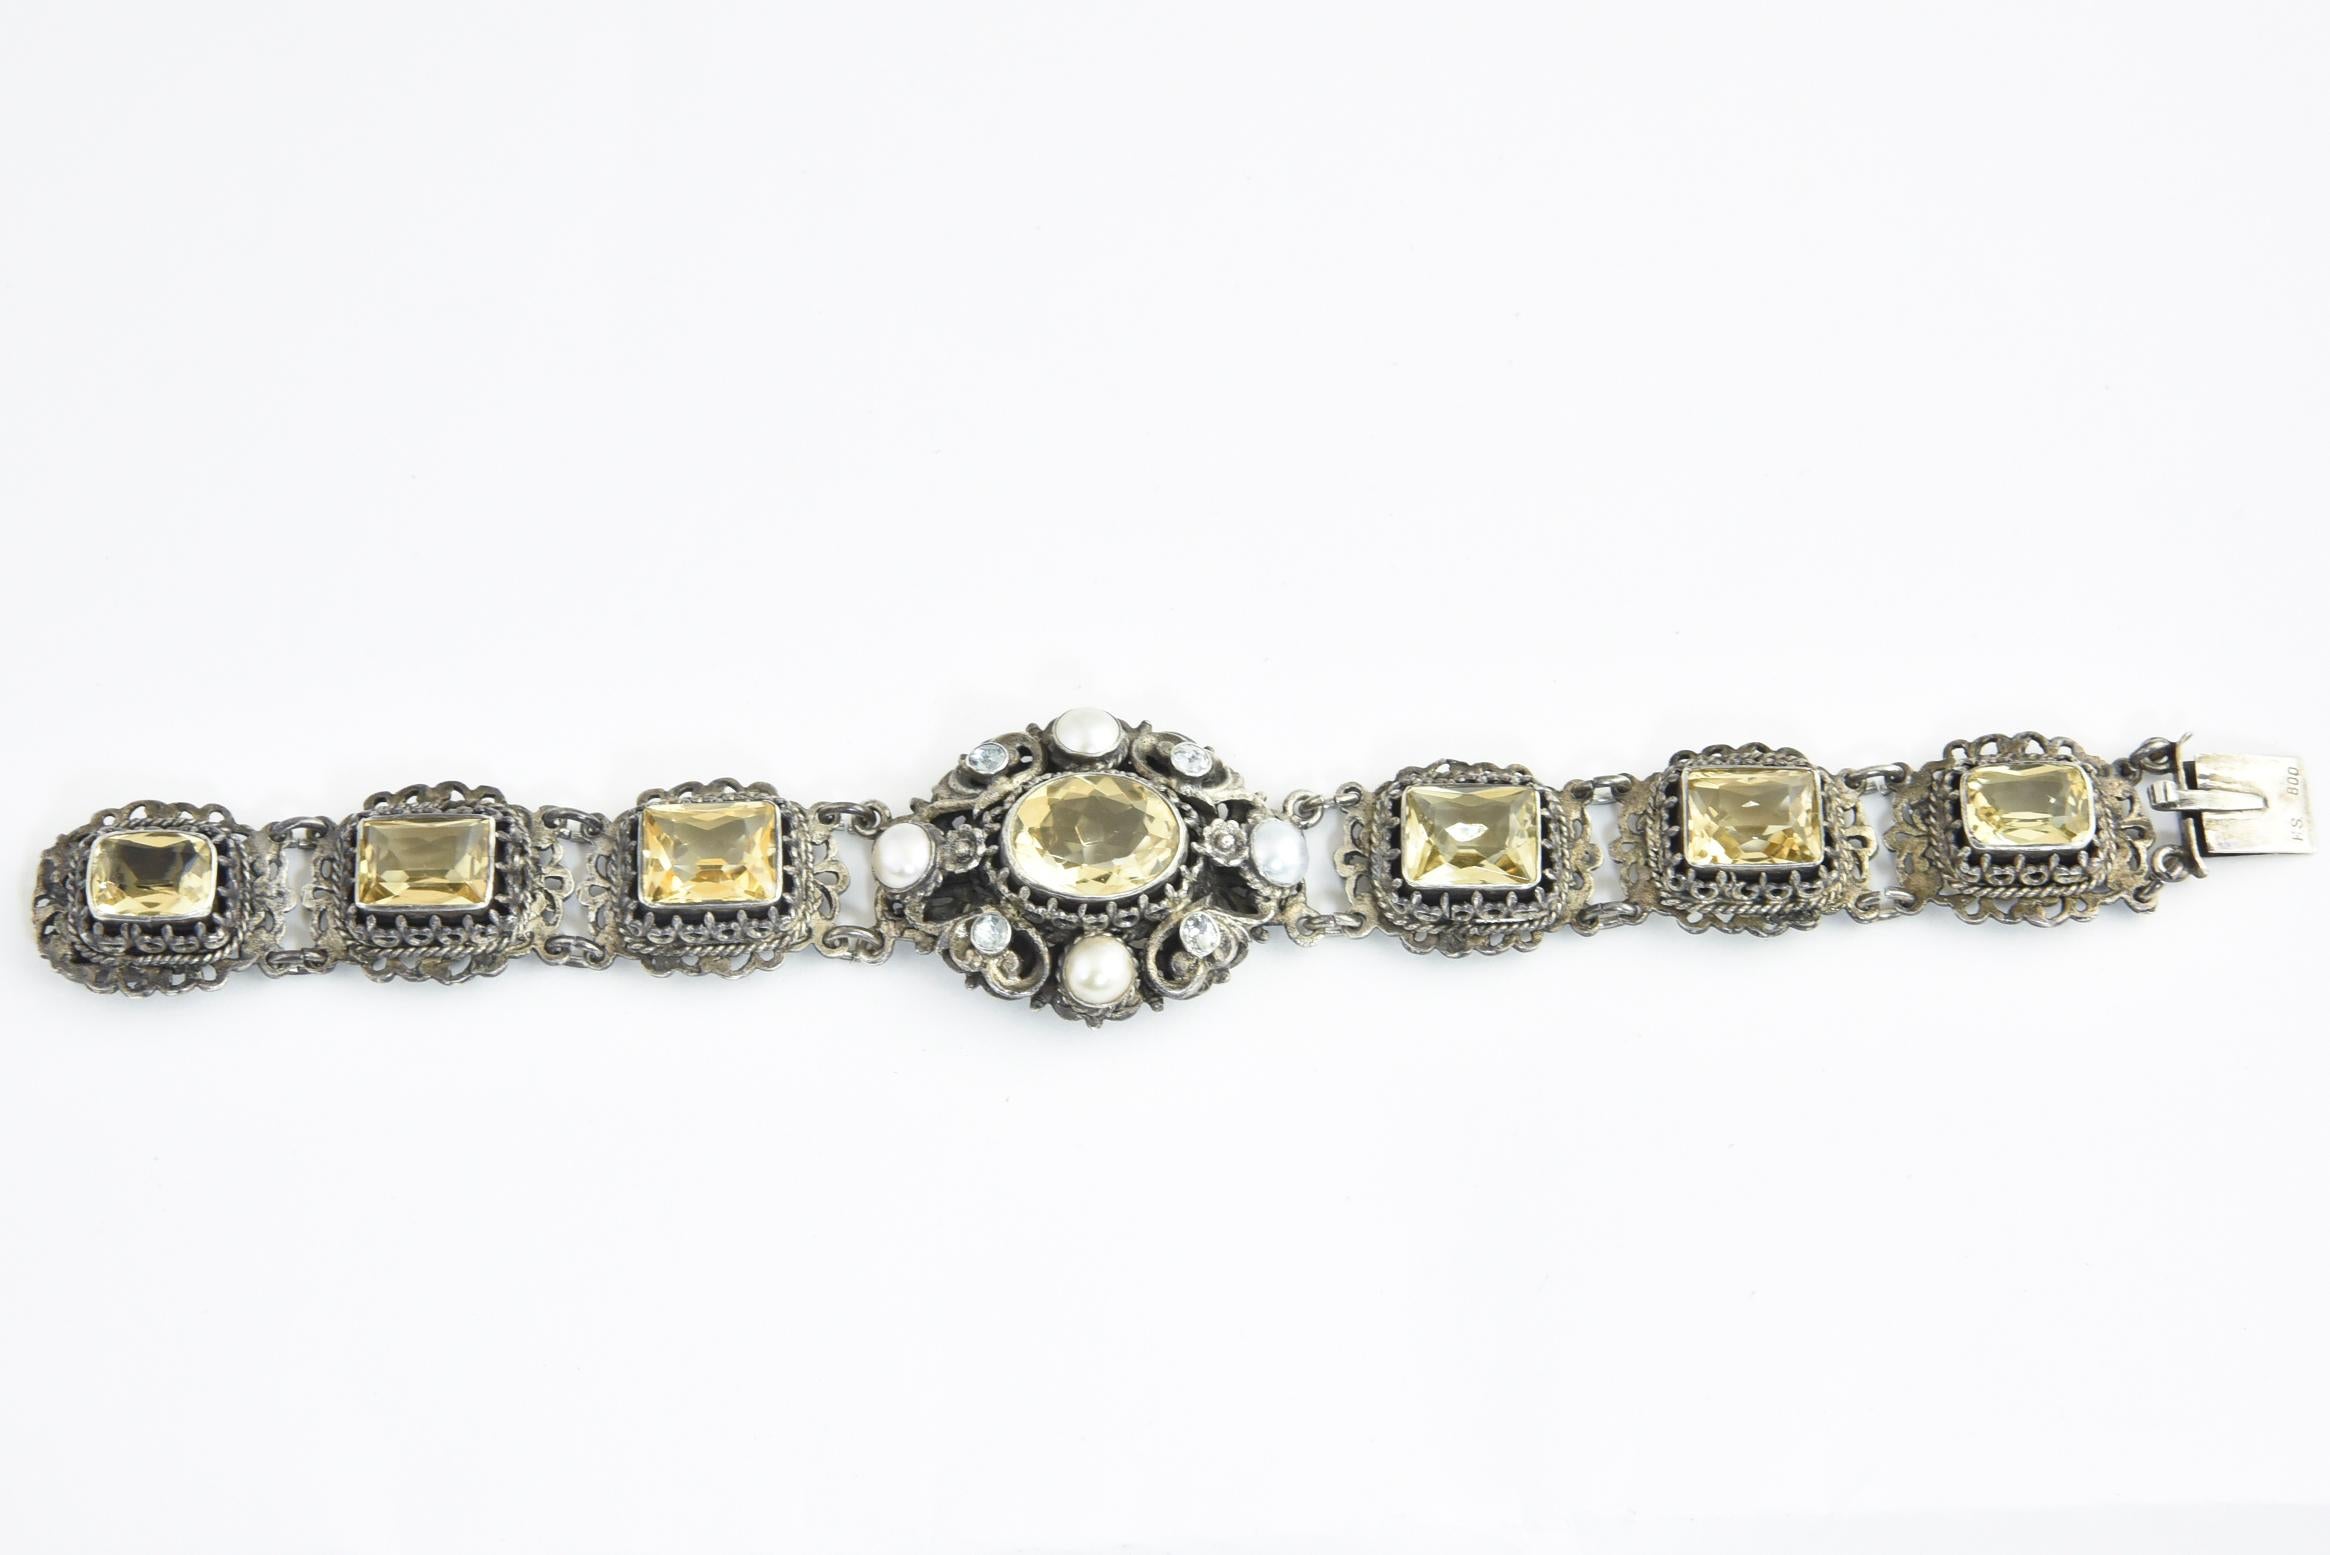 Austro-Hungarian citrine bracelet created between 1860 and 1910. Features an oval citrine surrounded by an ornate silver frame with pearl and paste accents. The main section has a band with 6 citrines mounted in silver frames. The metal is 800